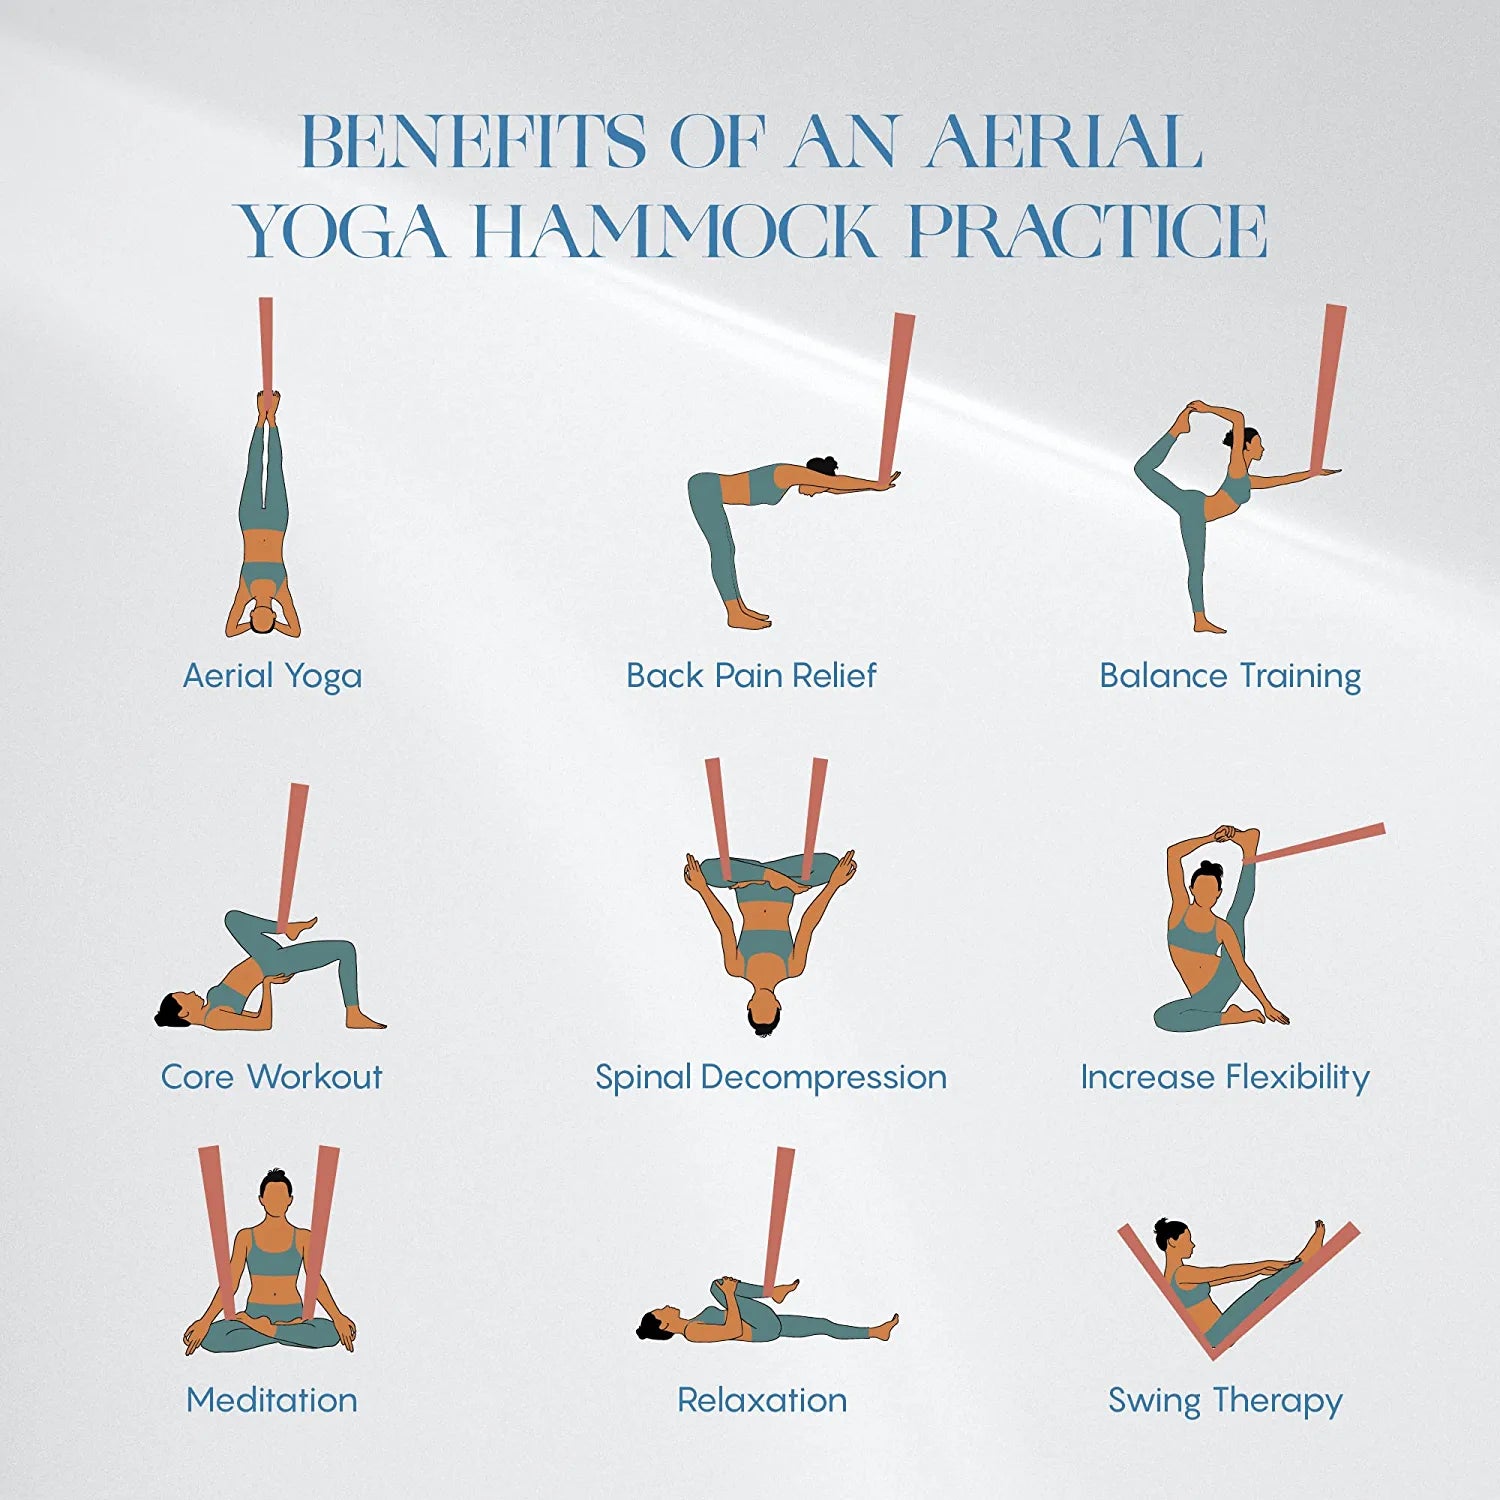 Pose Poster new email | Yoga trapeze poses, Aerial yoga poses, Yoga trapeze